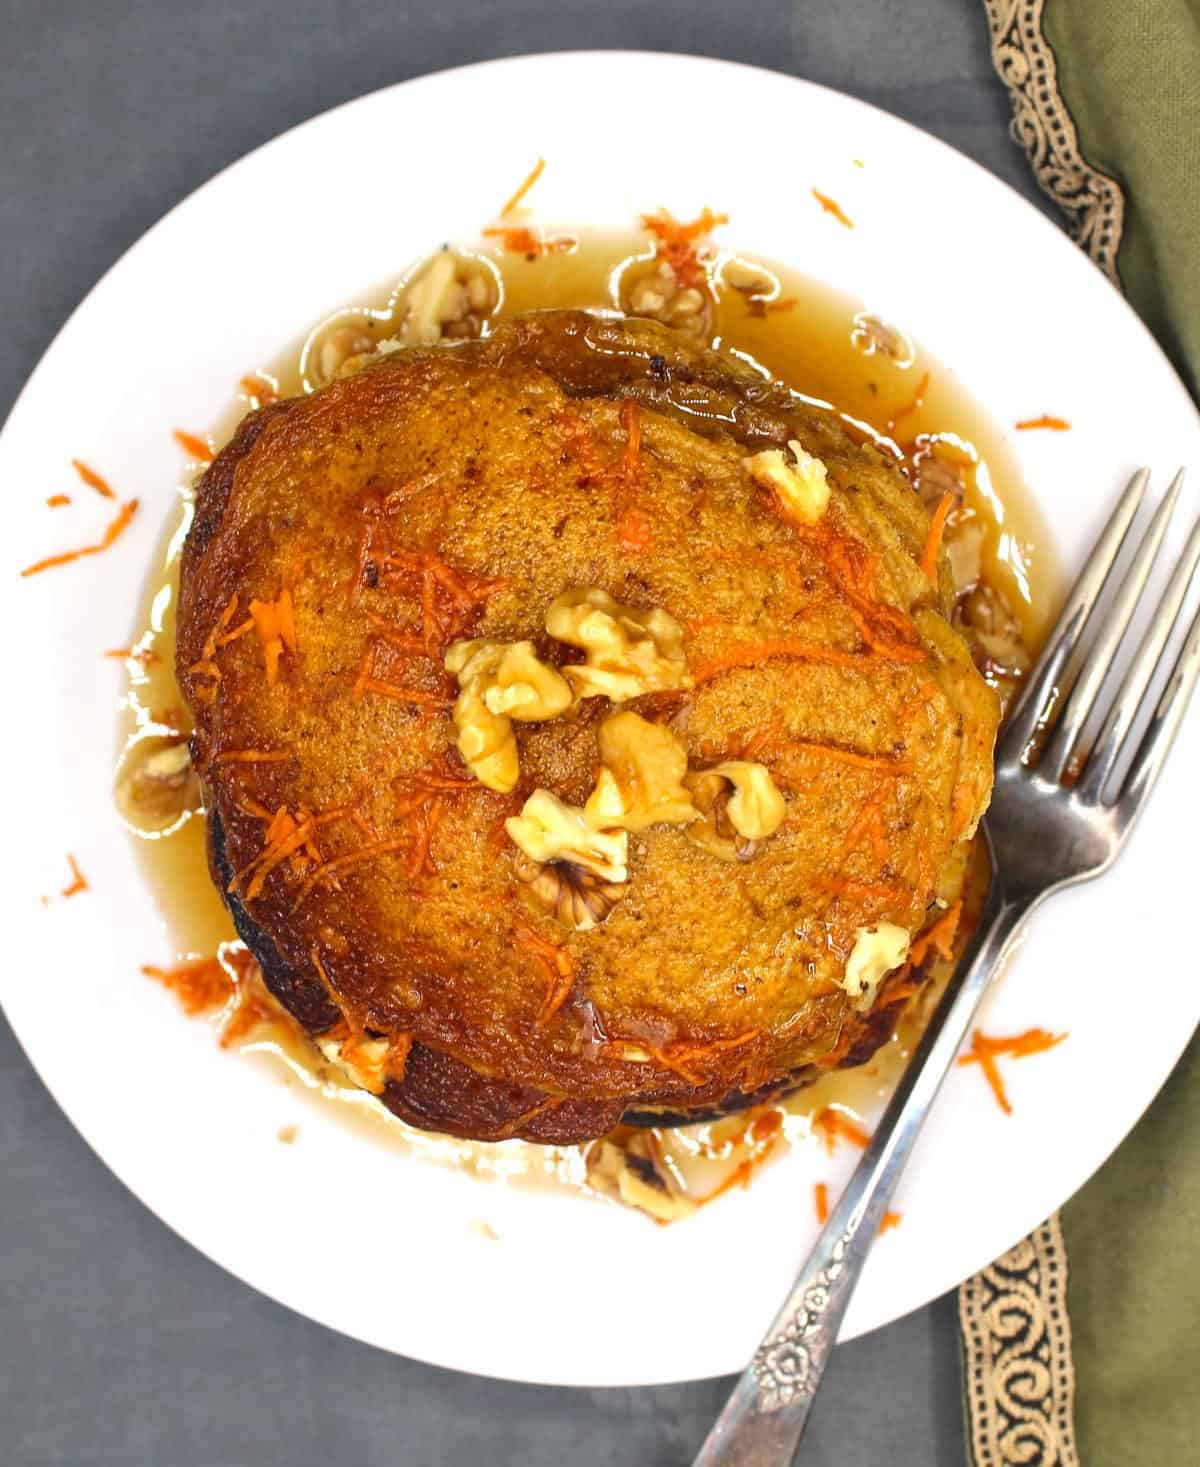 Overhead photo of vegan carrot pancakes in white plate with shredded carrots and walnuts and a fork.